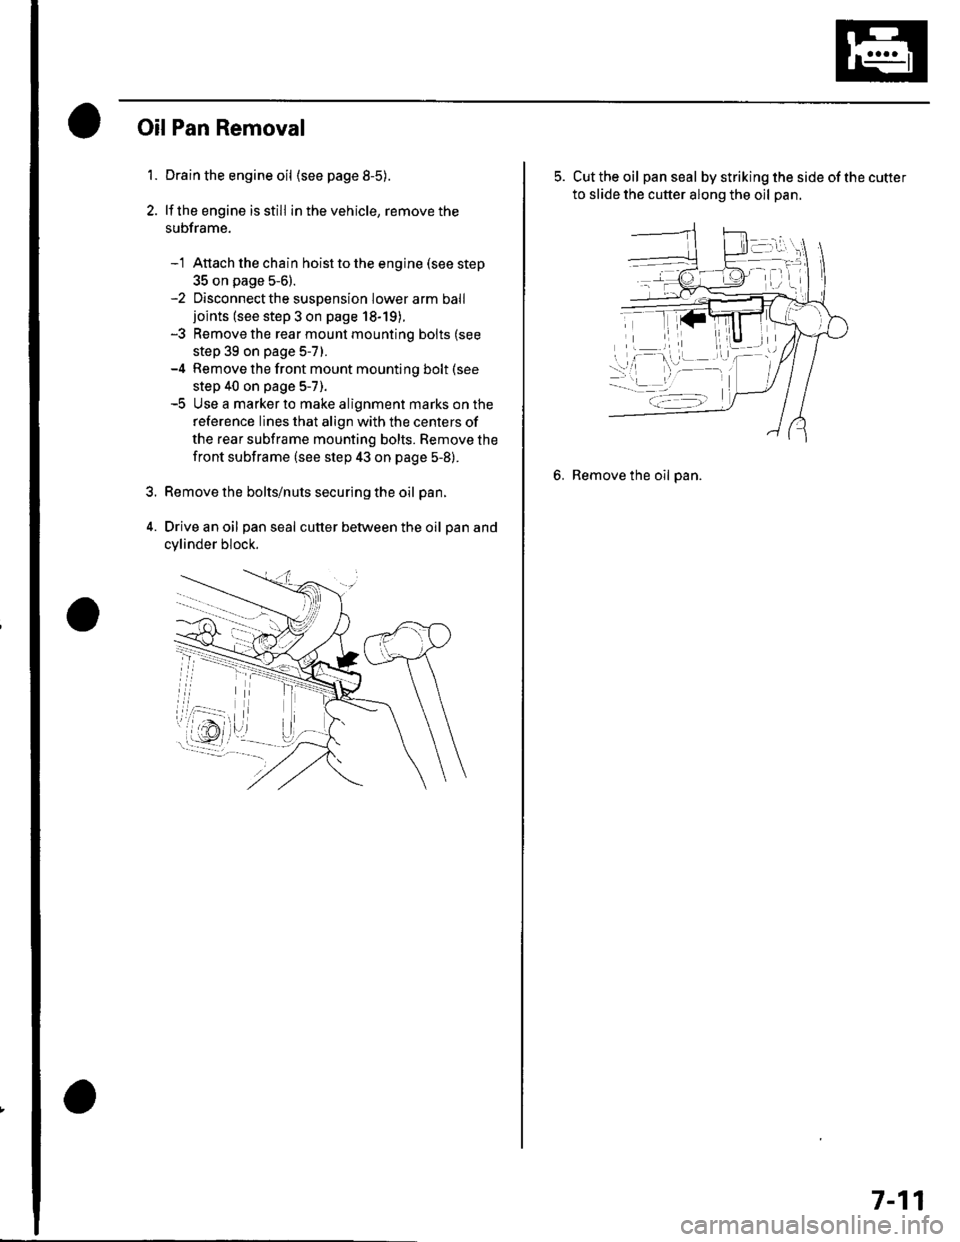 HONDA CIVIC 2003 7.G Service Manual 1.
OilPan Removal
Drain the engine oil (see page 8-5).
lf the engine is still in the vehicle, remove the
subframe.
-1 Attach the chain hoist to the engine (see step
35 on page 5-6).-2 Disconnectthe su